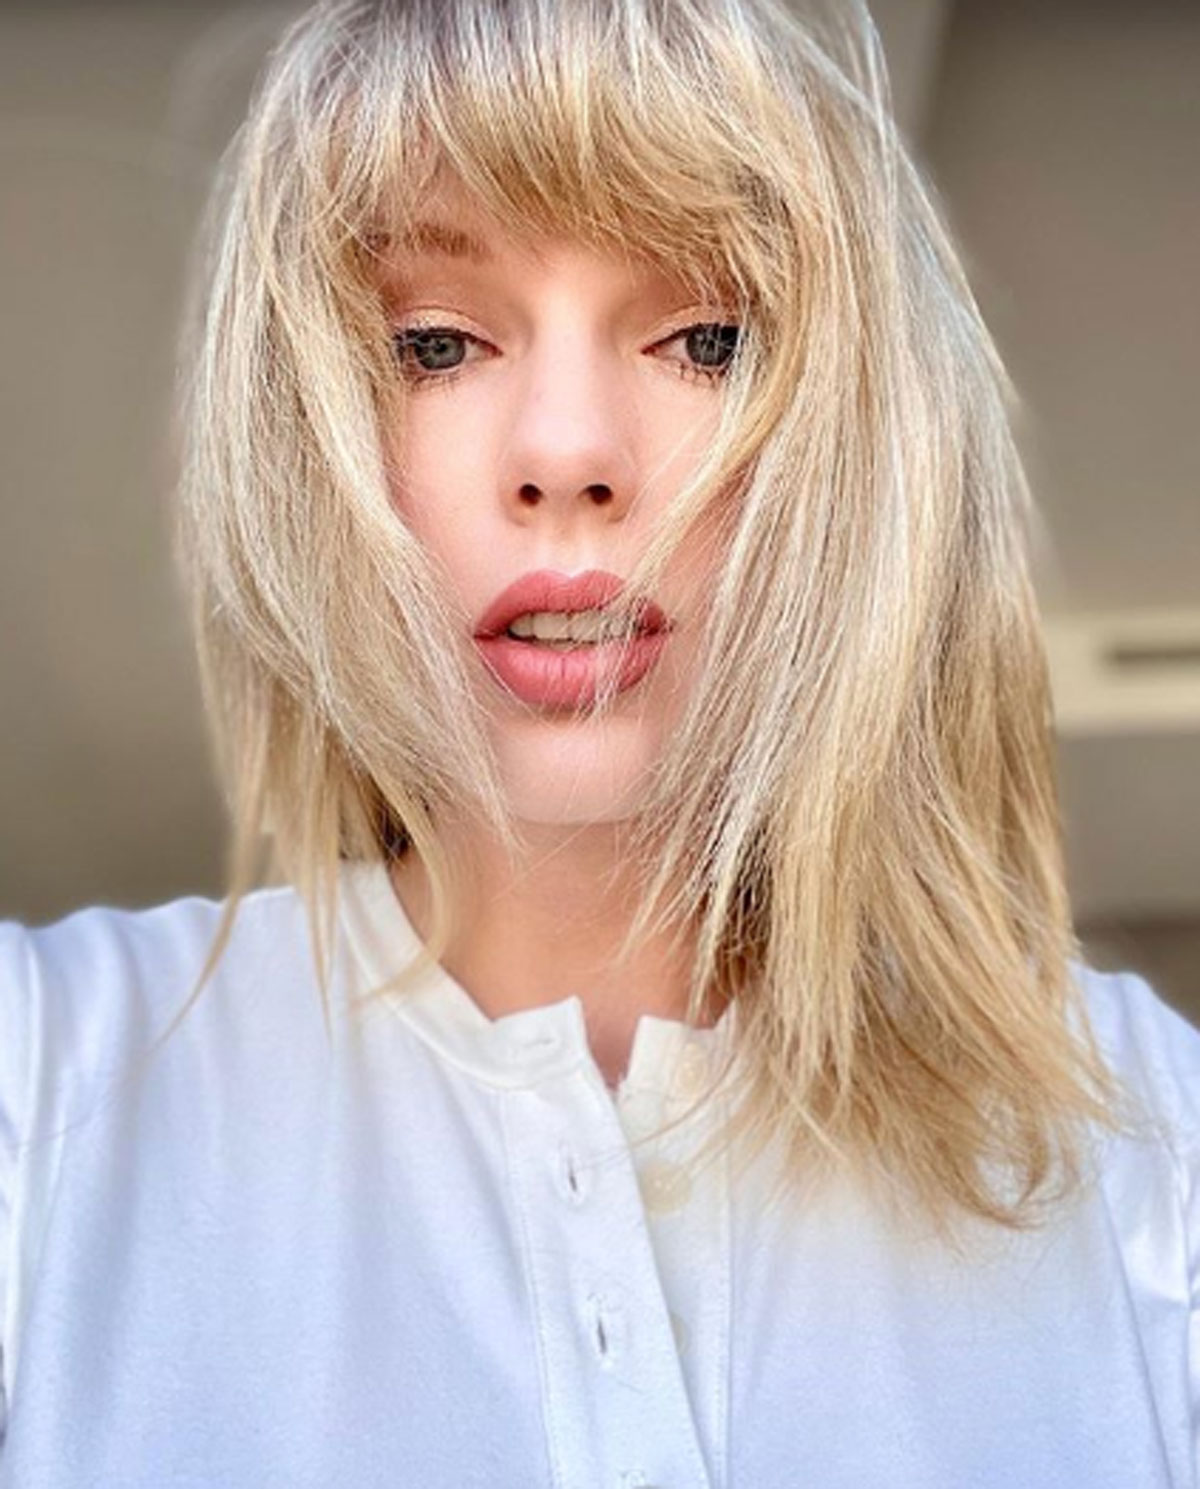 Taylor Swift Sex Toys - Taylor Swift Fans Believe A Christmas Album Is In The Works As 'Lover' Duet  With Shawn Mendes Drops! - CelebrityTalker.com